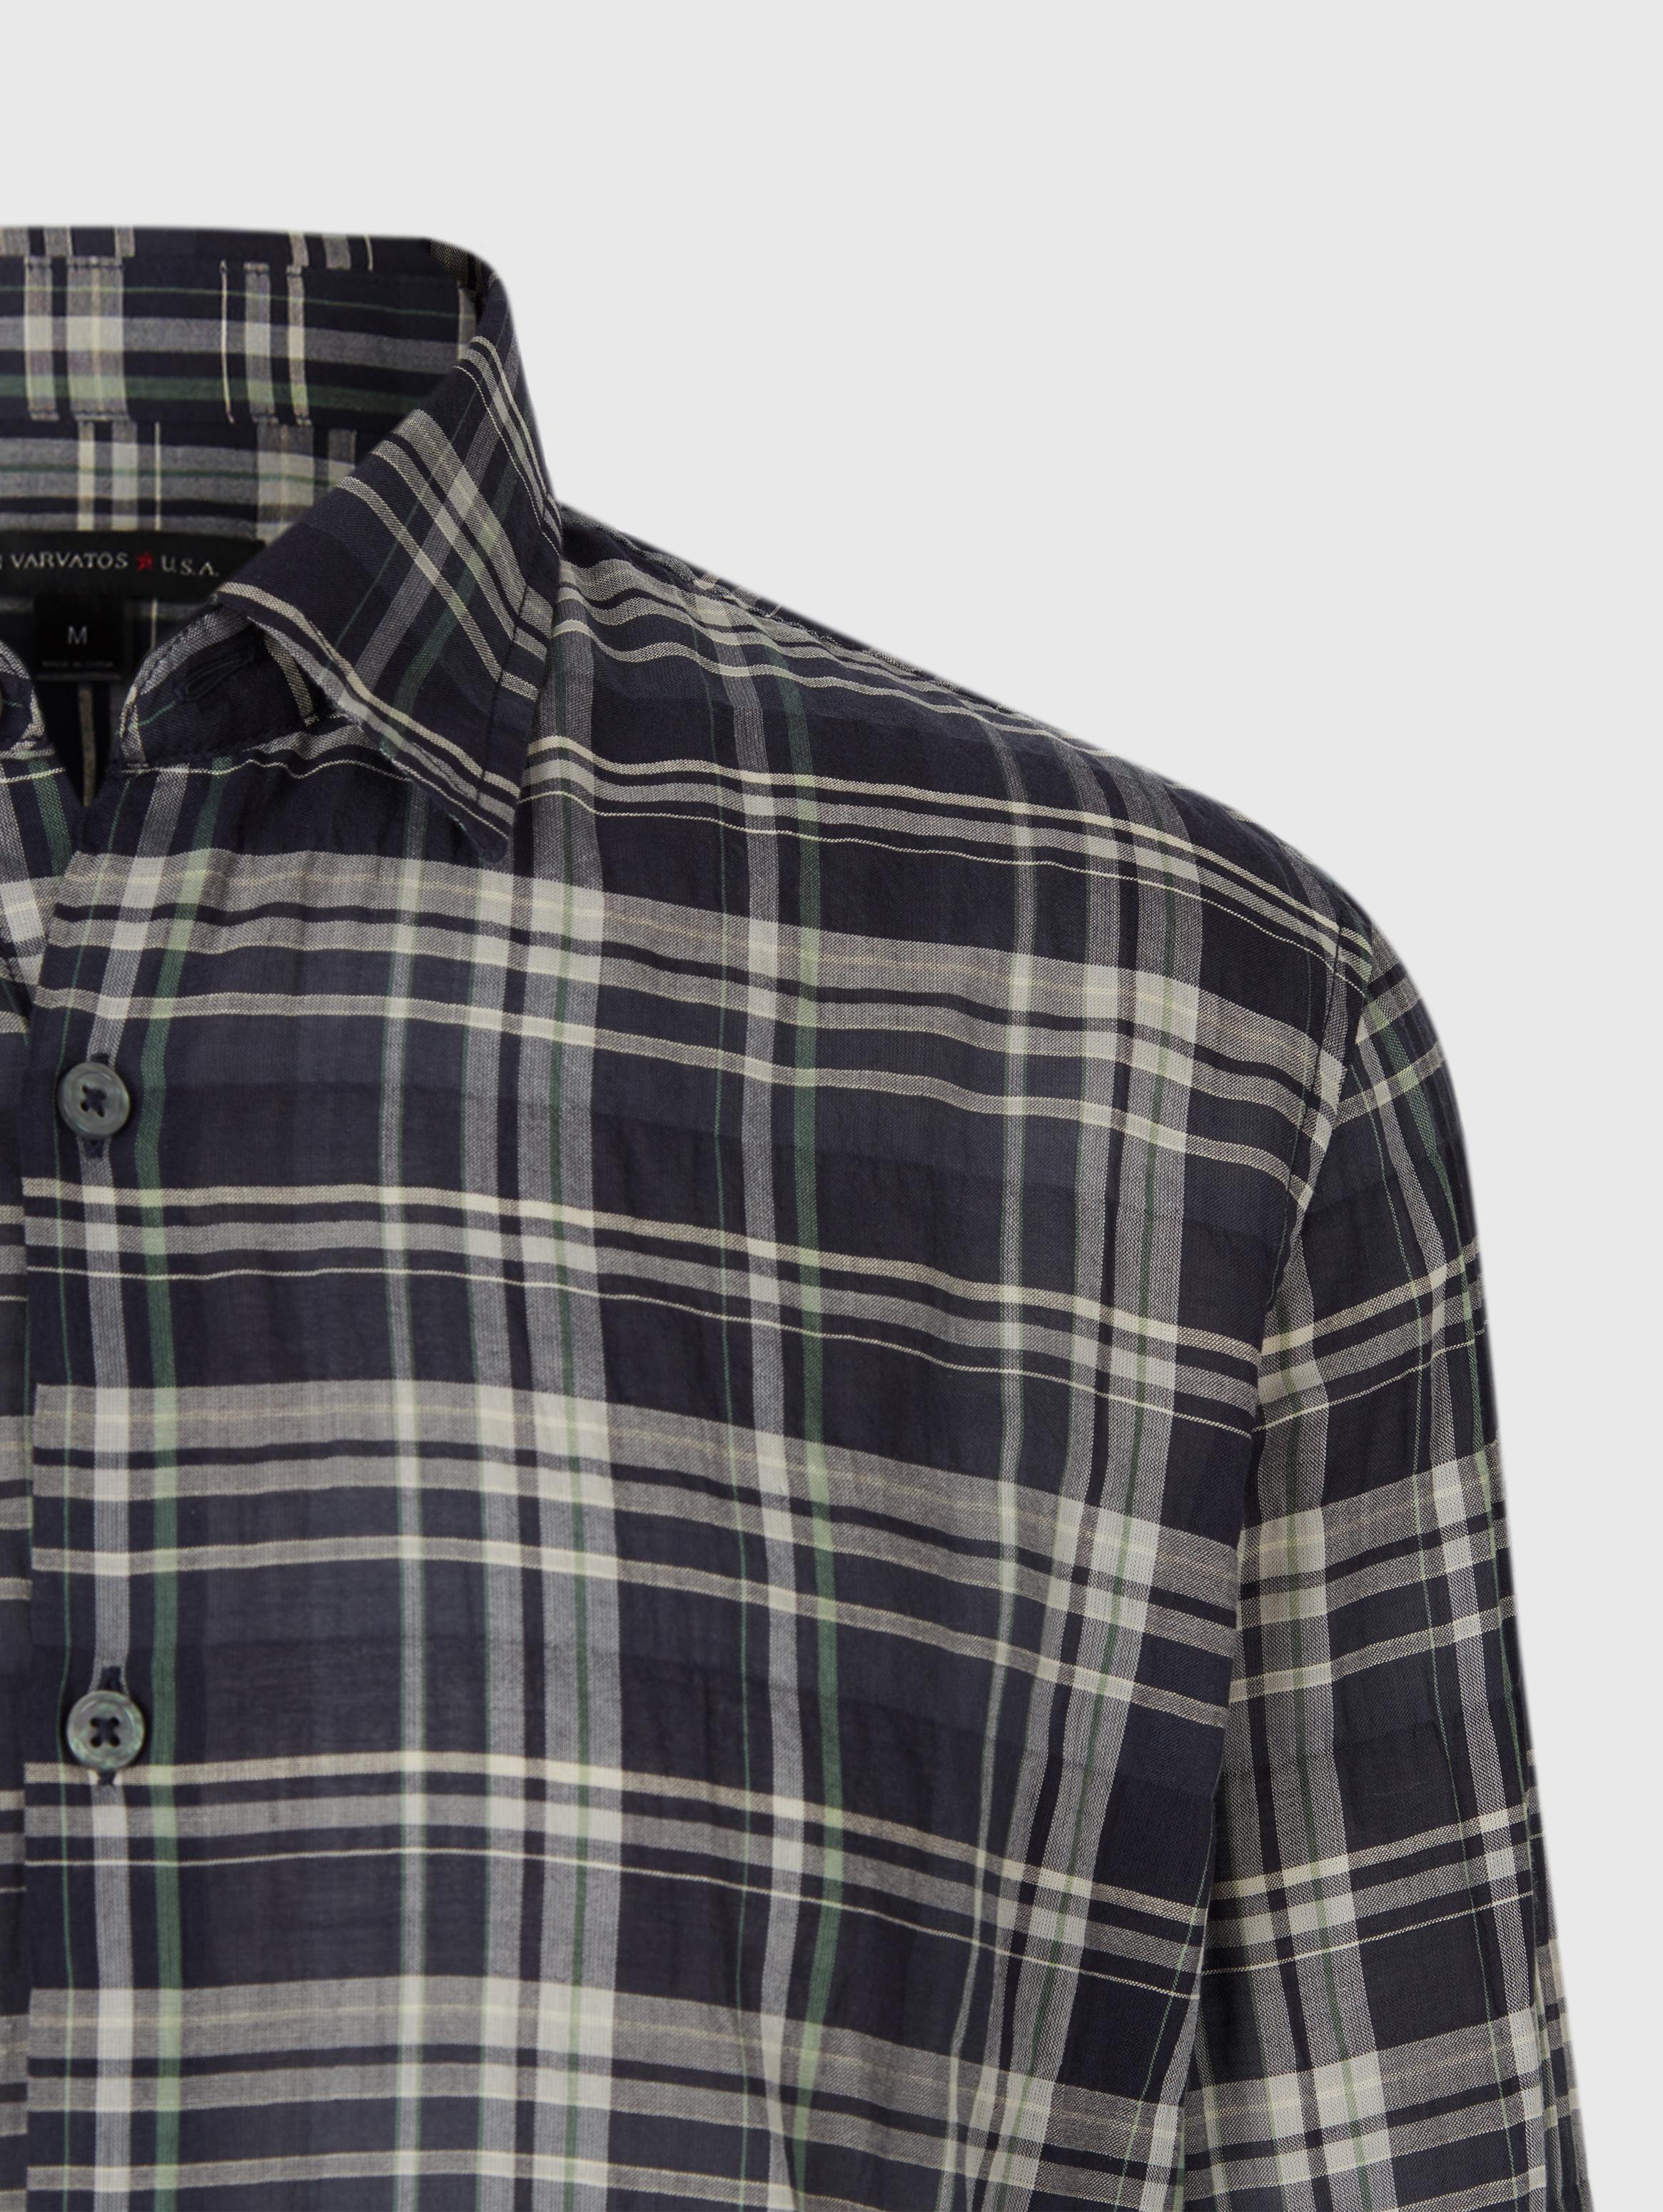 MAYFIELD SLIM FIT POINT COLLAR - PLAID image number 3